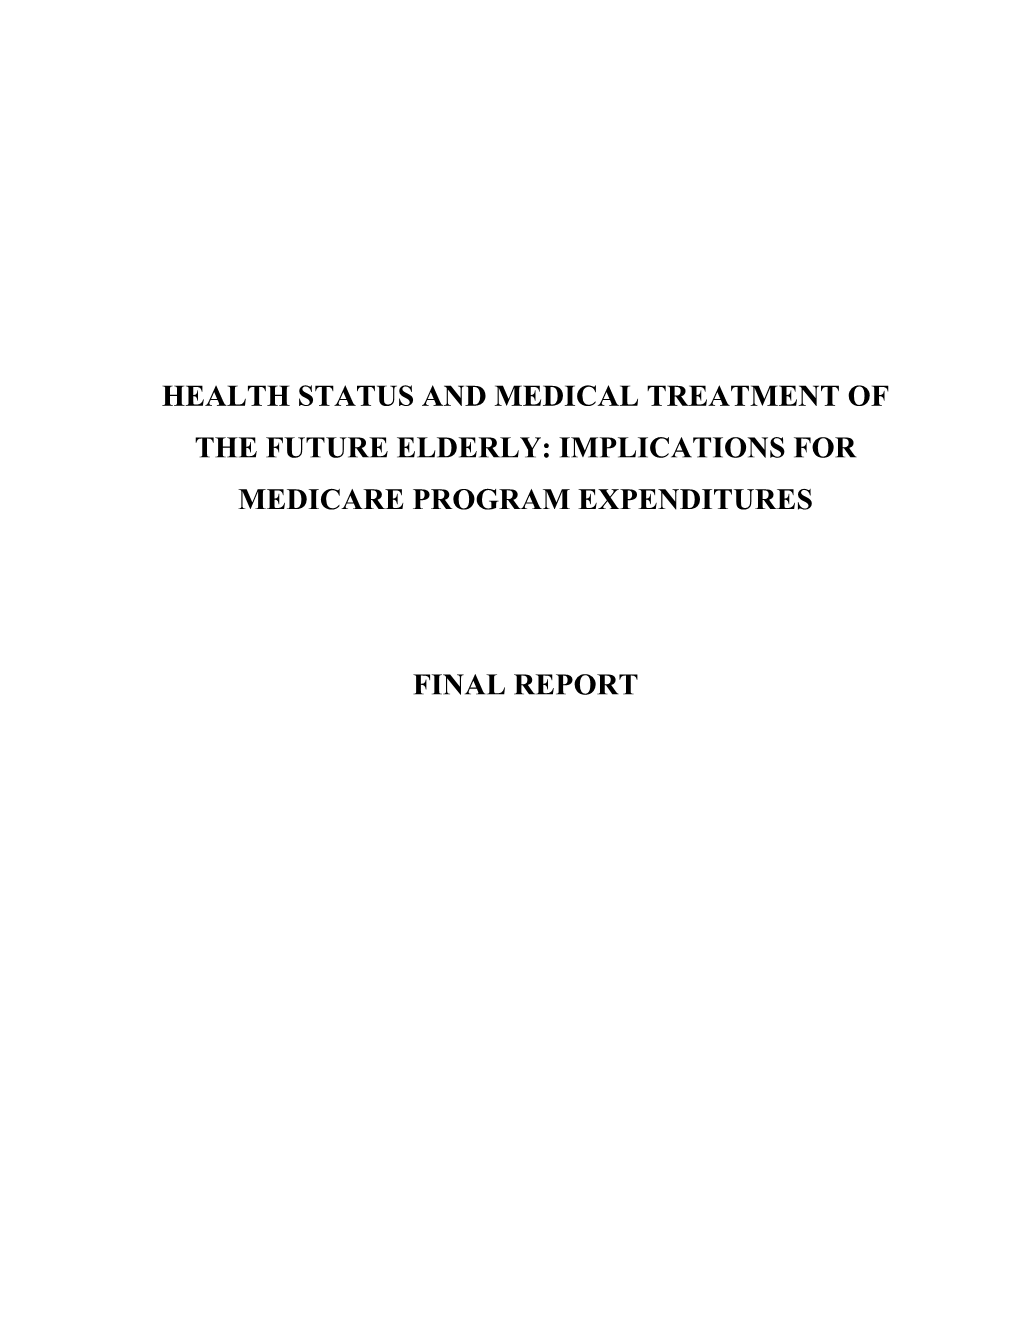 Health Status and Medical Treatment of the Future Elderly: Implications for Medicare Program Expenditures